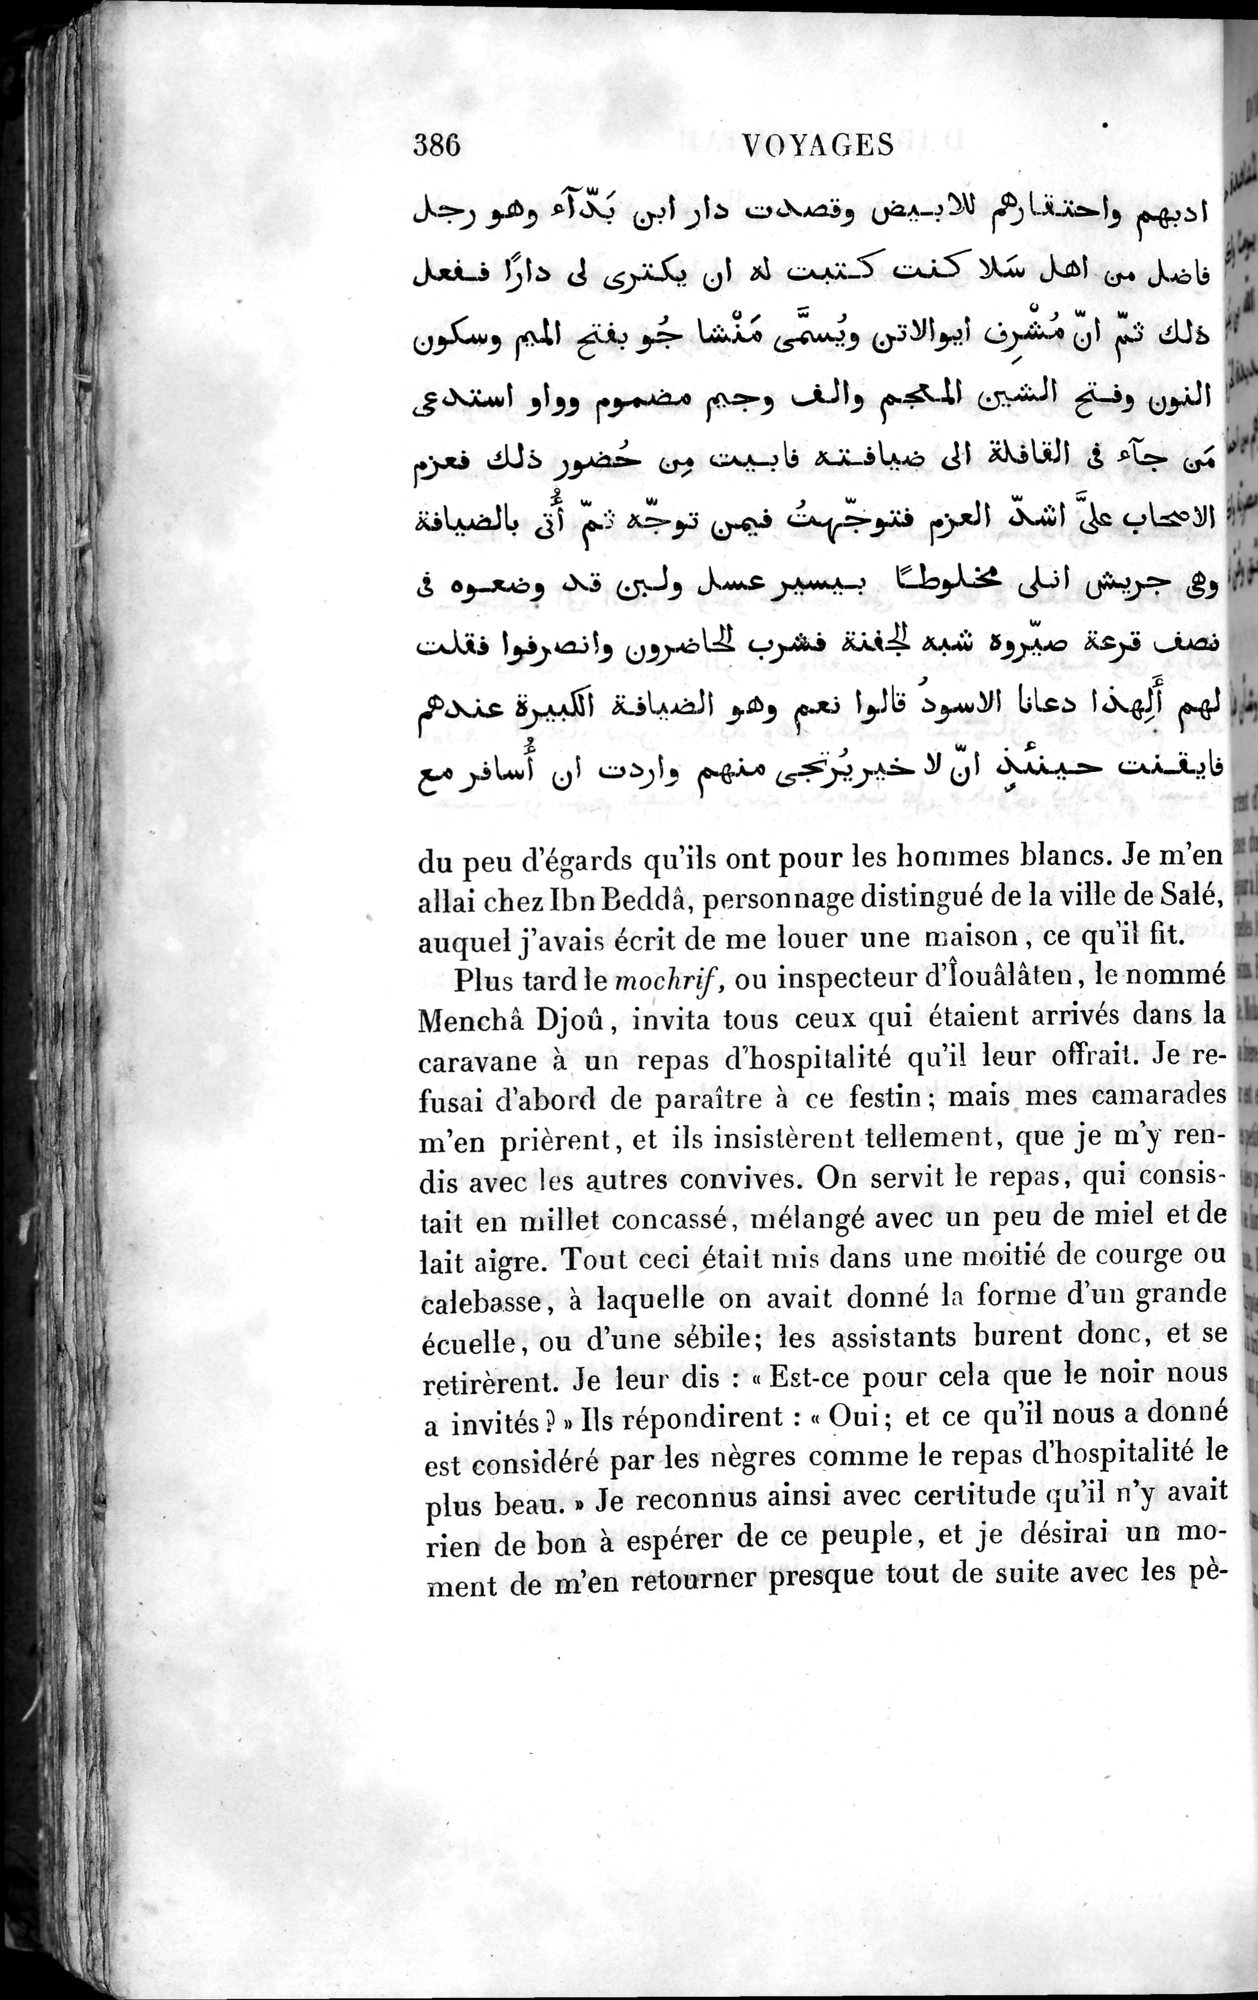 Voyages d'Ibn Batoutah : vol.4 / Page 398 (Grayscale High Resolution Image)